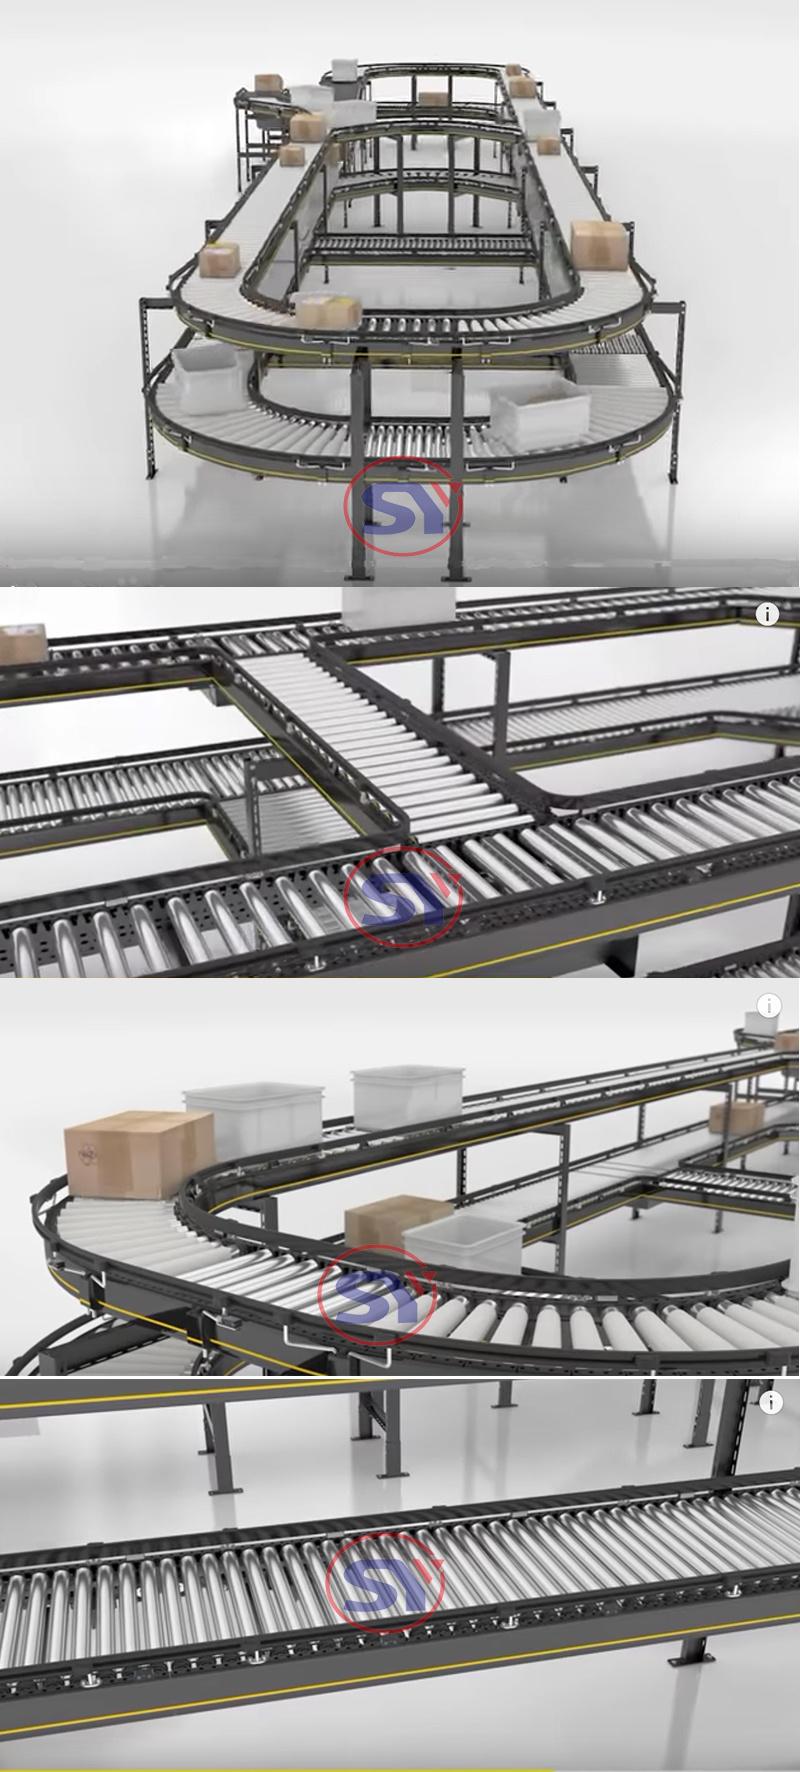 Linear&Horizontal Roll Roller Conveyor with Adjustable Height Guardrail